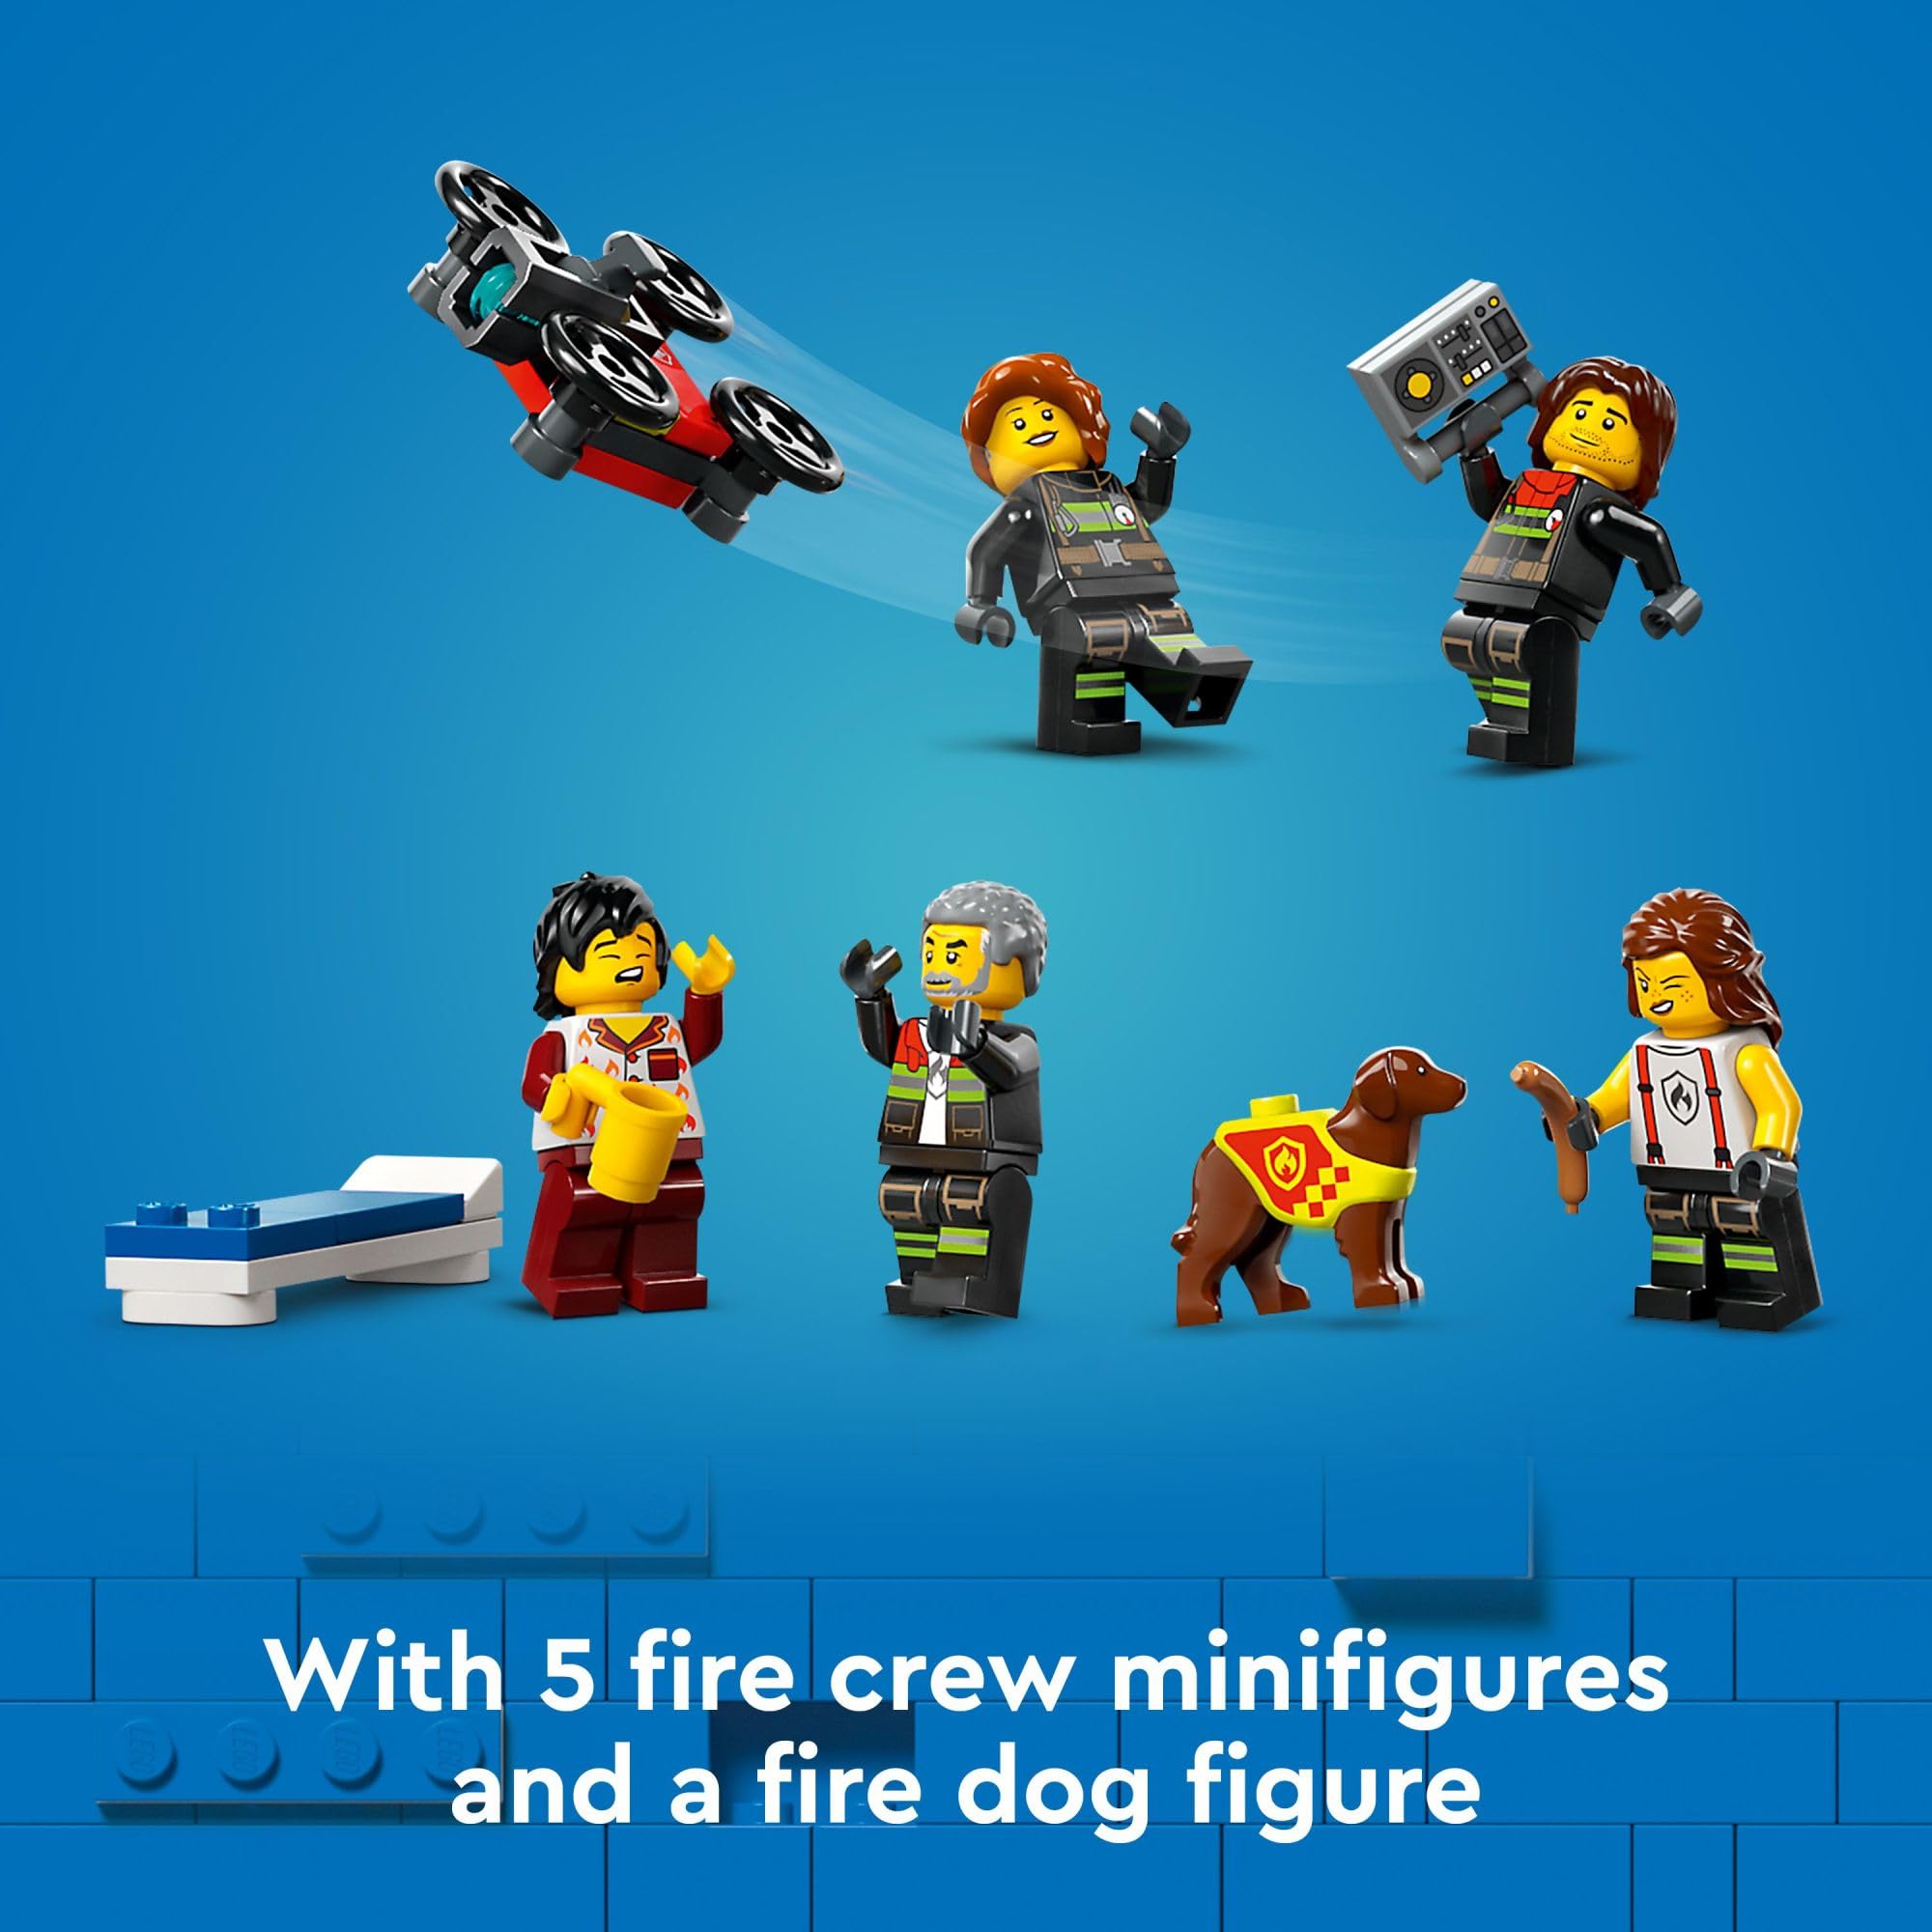 LEGO City Fire Station with Fire Truck Toy, Action Packed Fire Station Toy Playset, Birthday Gift Idea for Kids Ages 6 and Up who Love Pretend Play Toys, Includes a Dog Figure and 5 Minifigures, 60414